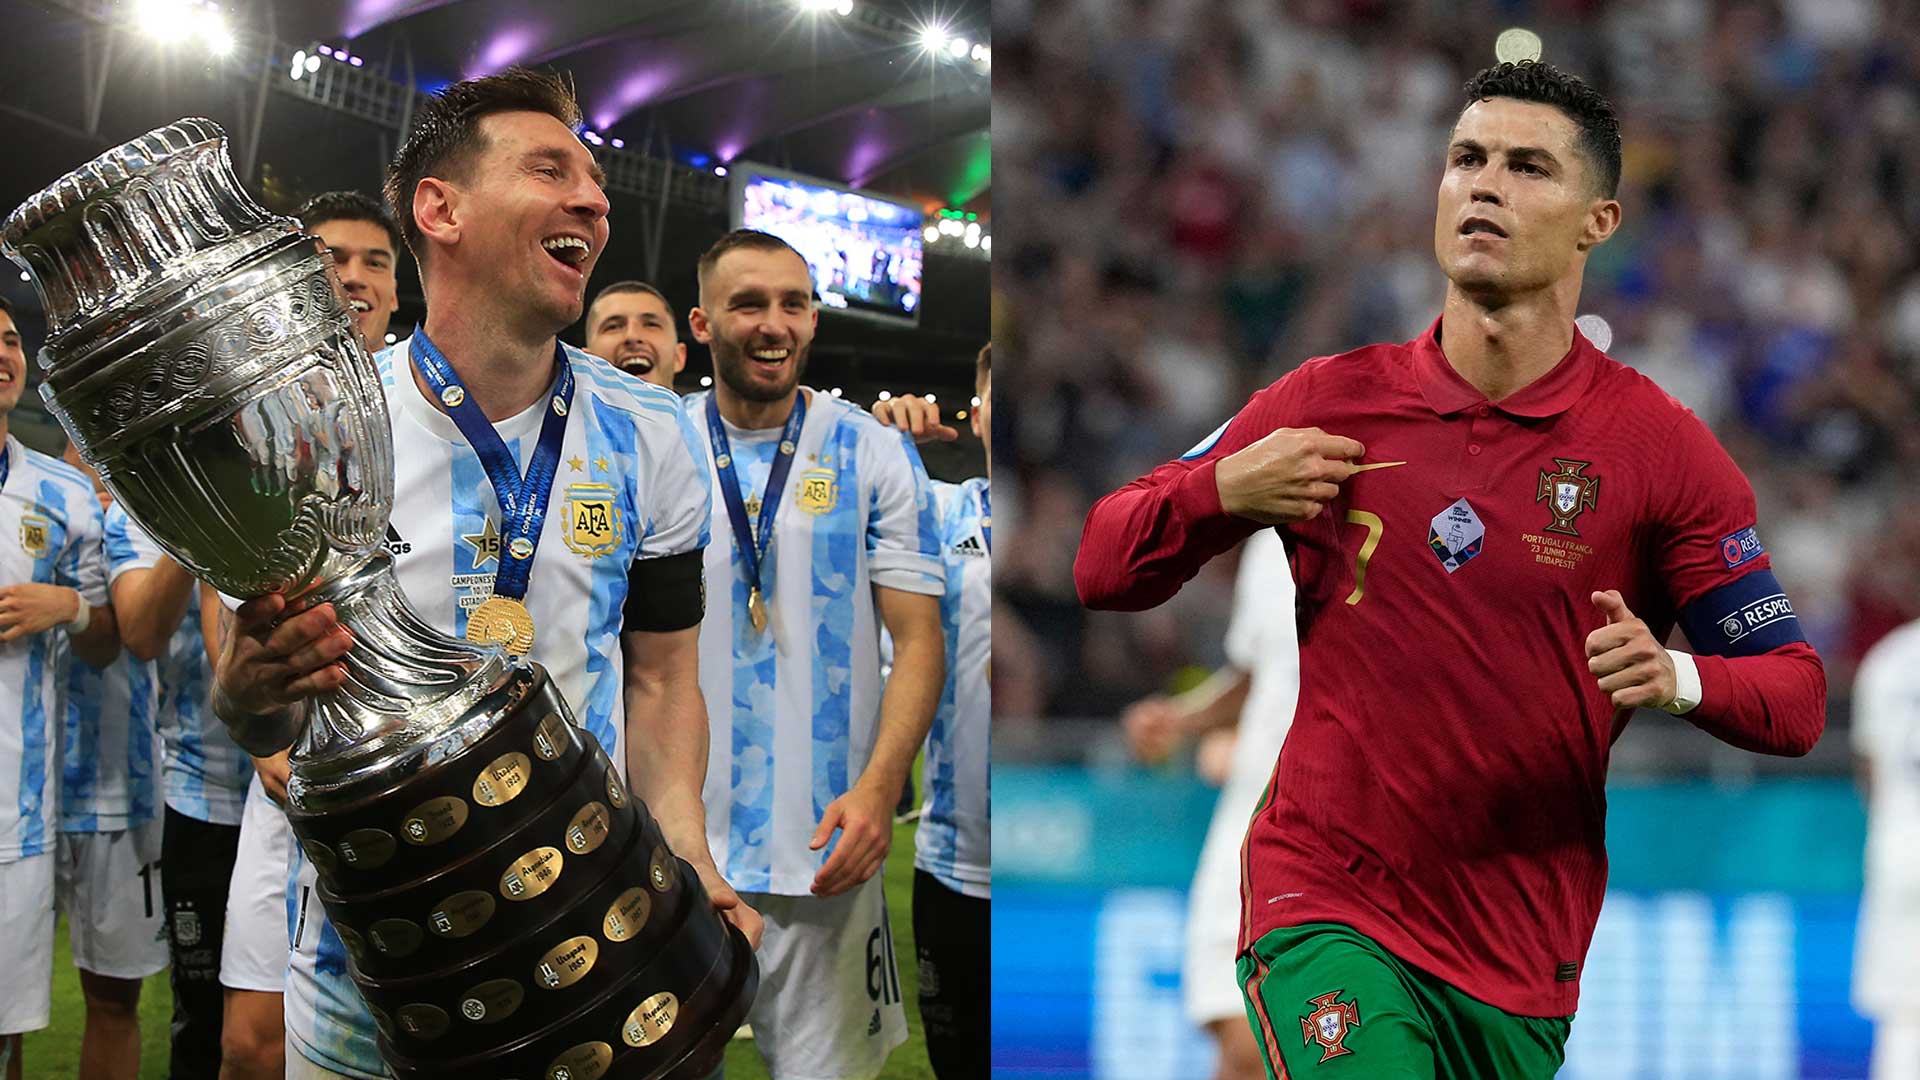 Cristiano Ronaldo and Lionel Messi come together for first-ever joint  promotion ahead of FIFA World Cup 2022